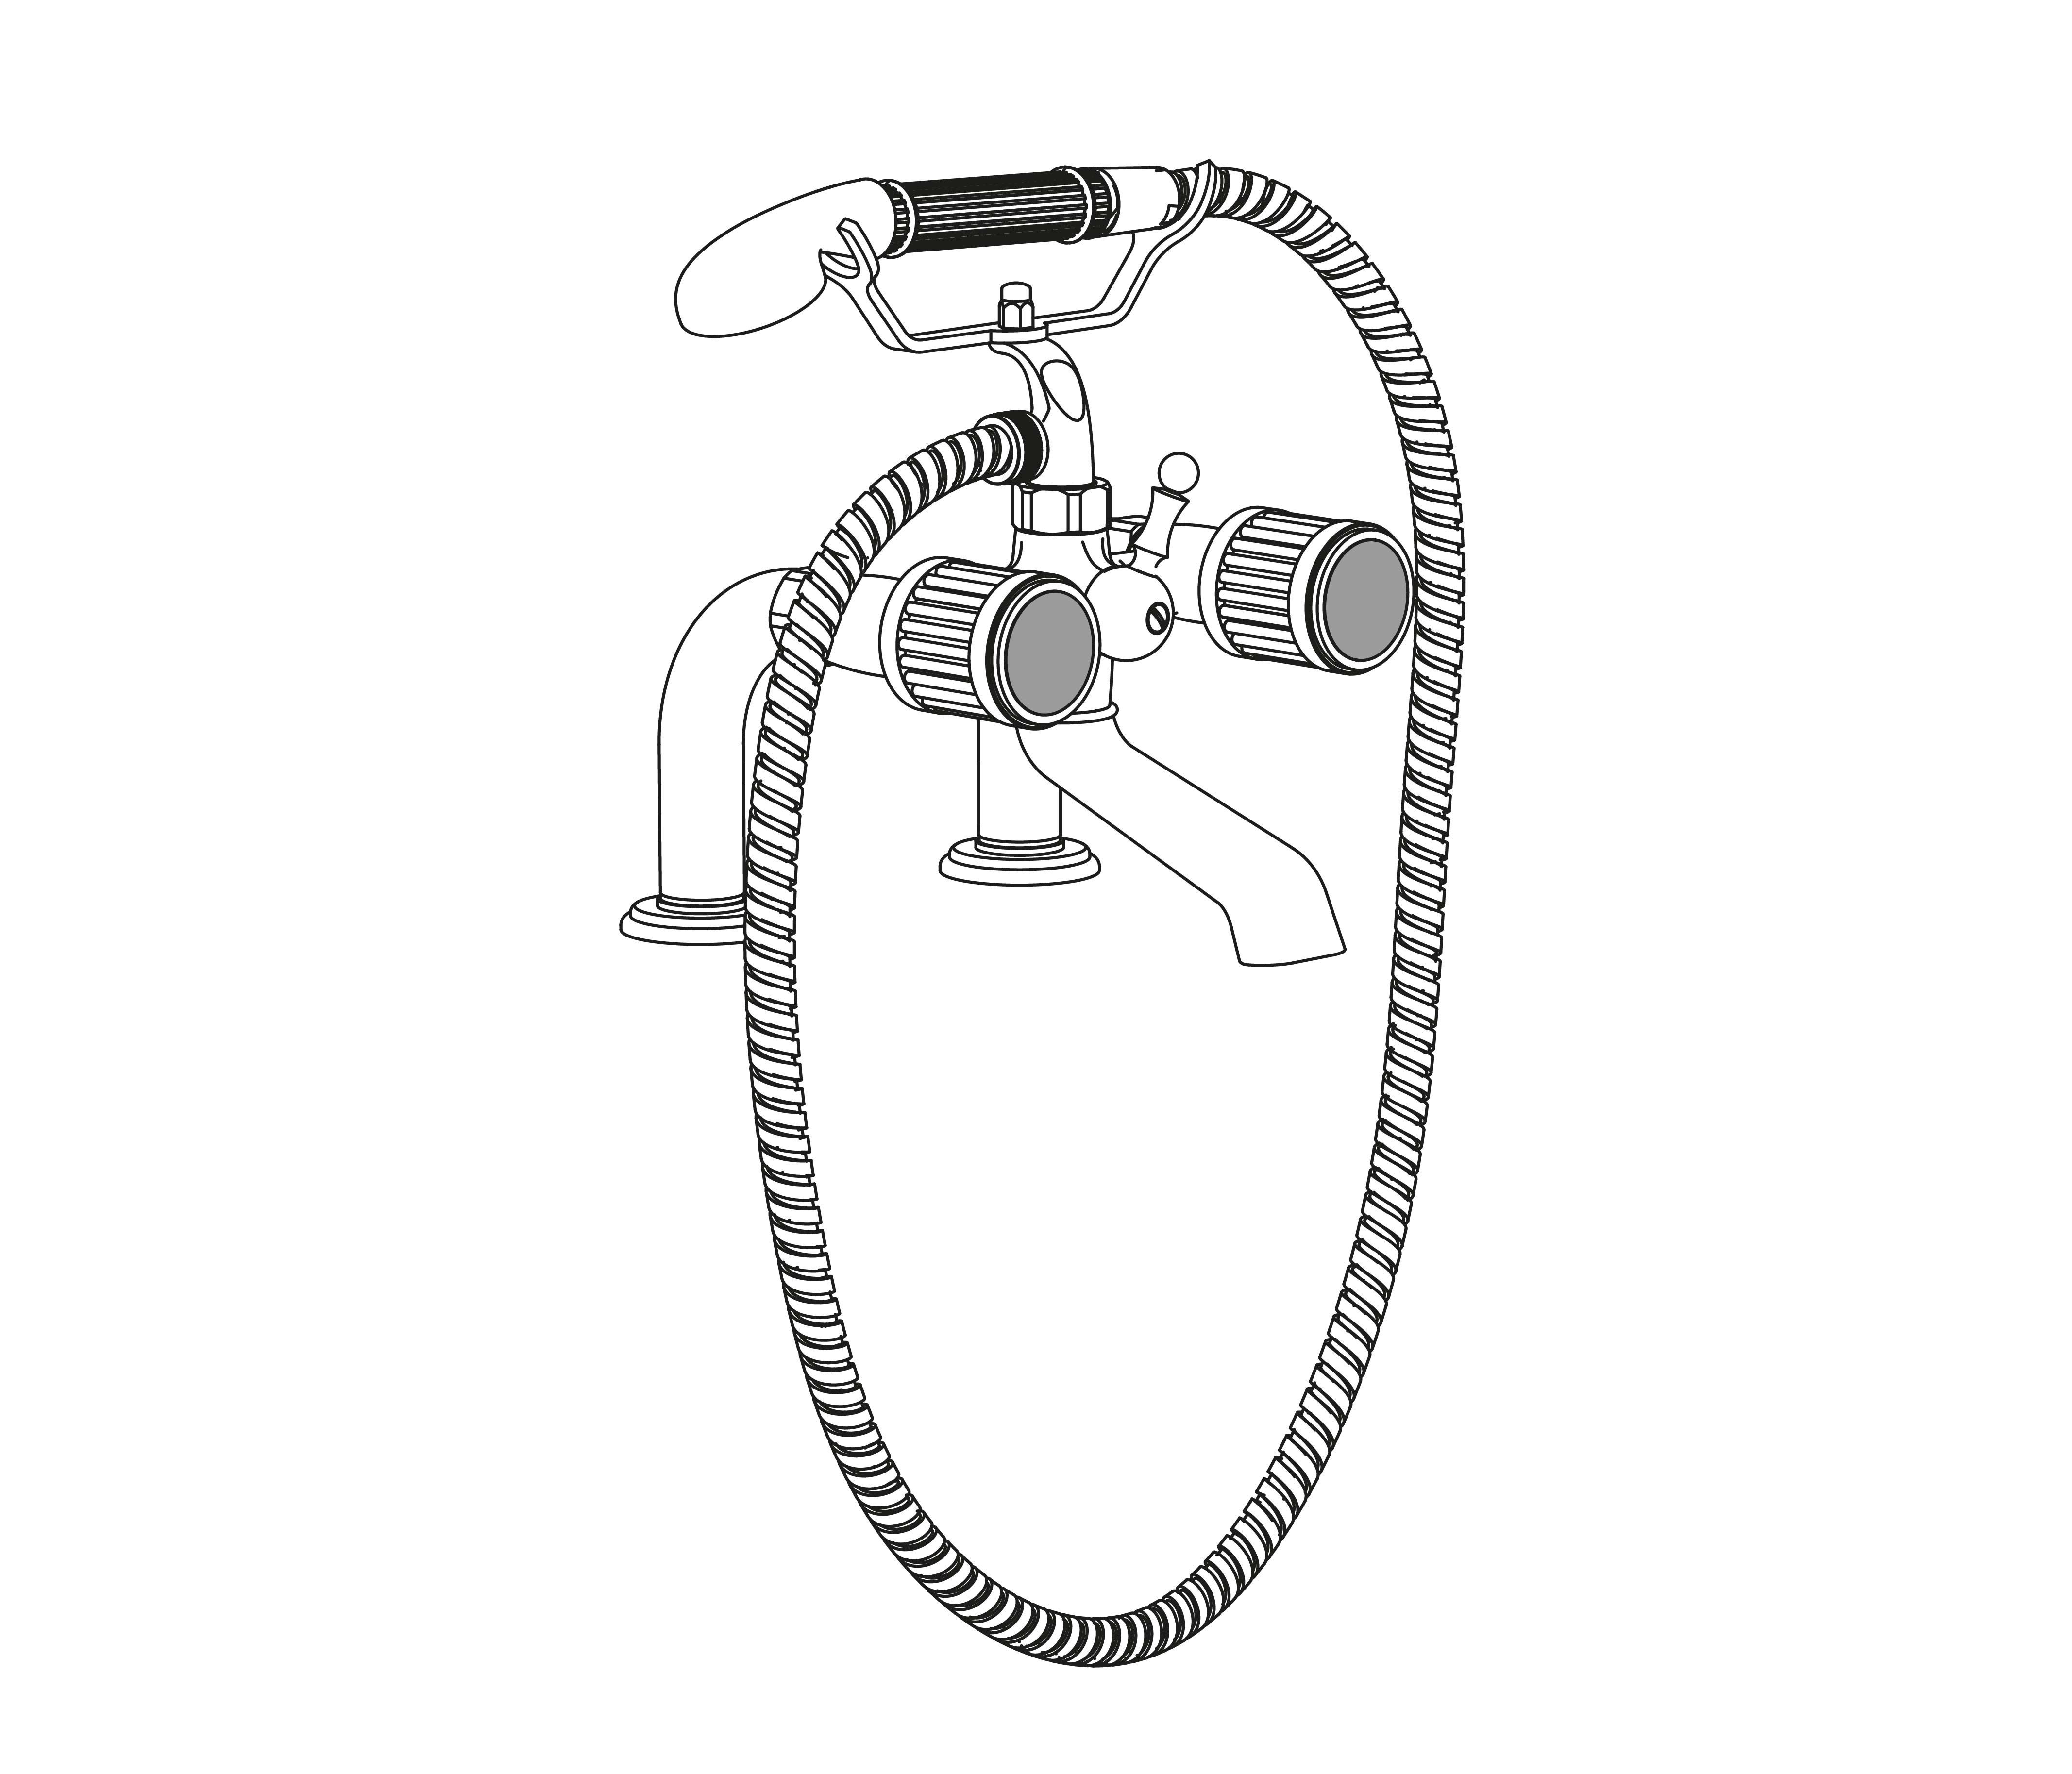 S92-3306 Rim mounted bath and shower mixer